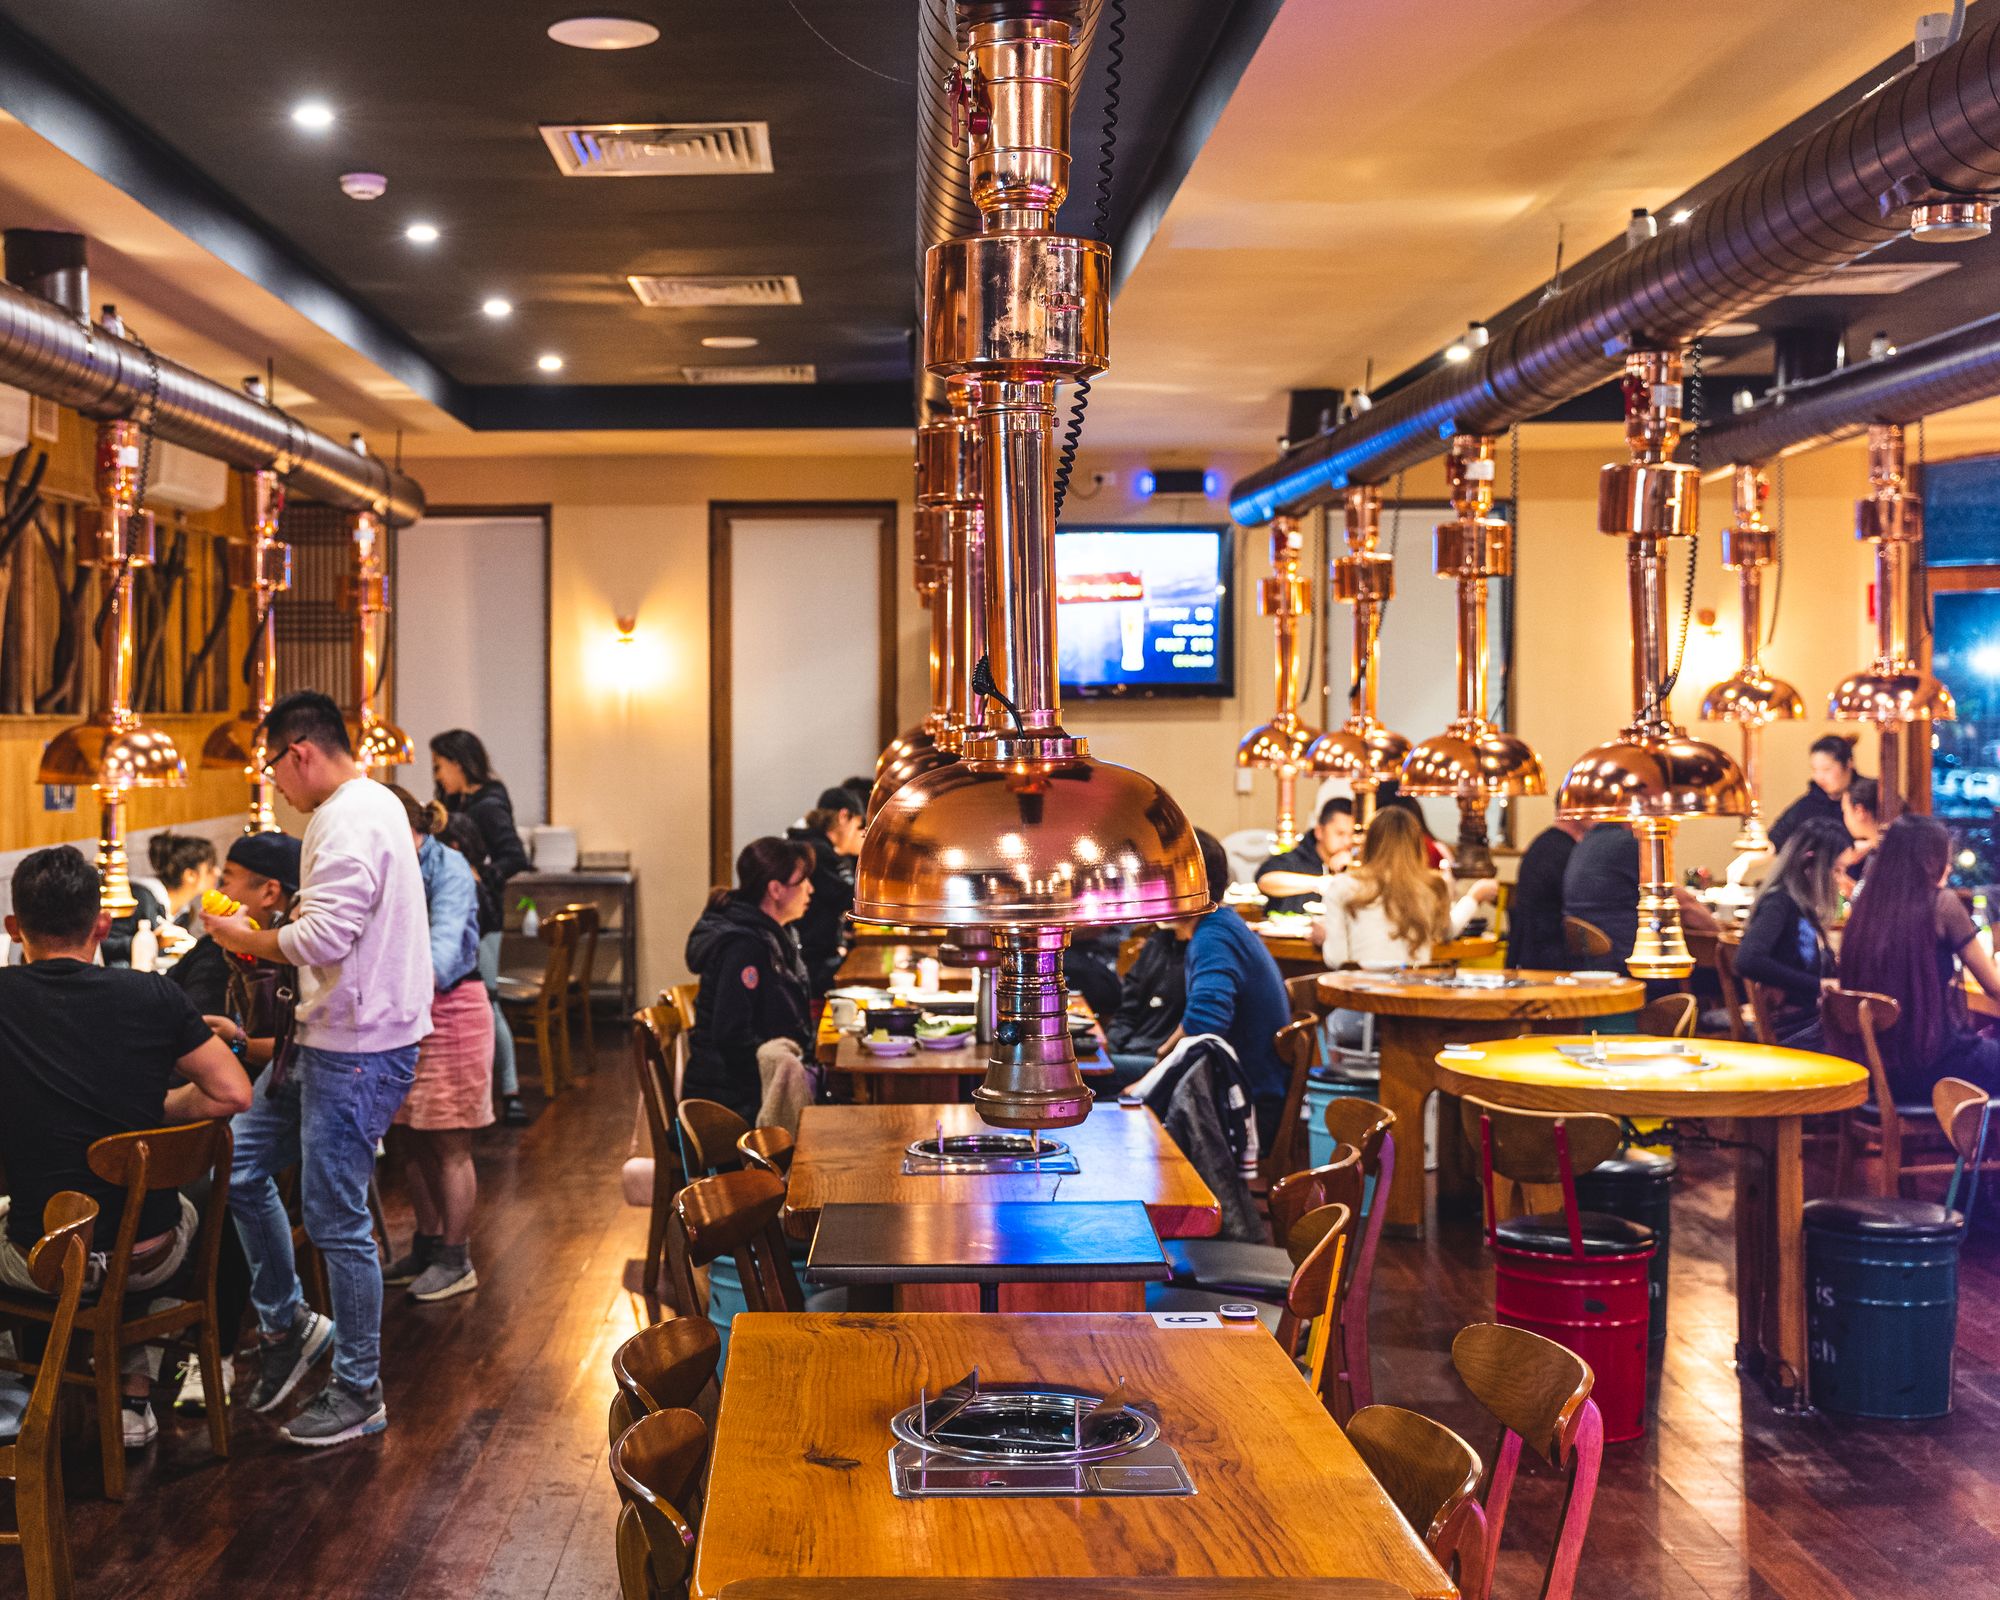 A bustling Korean BBQ restaurant with overhanging exhaust fans